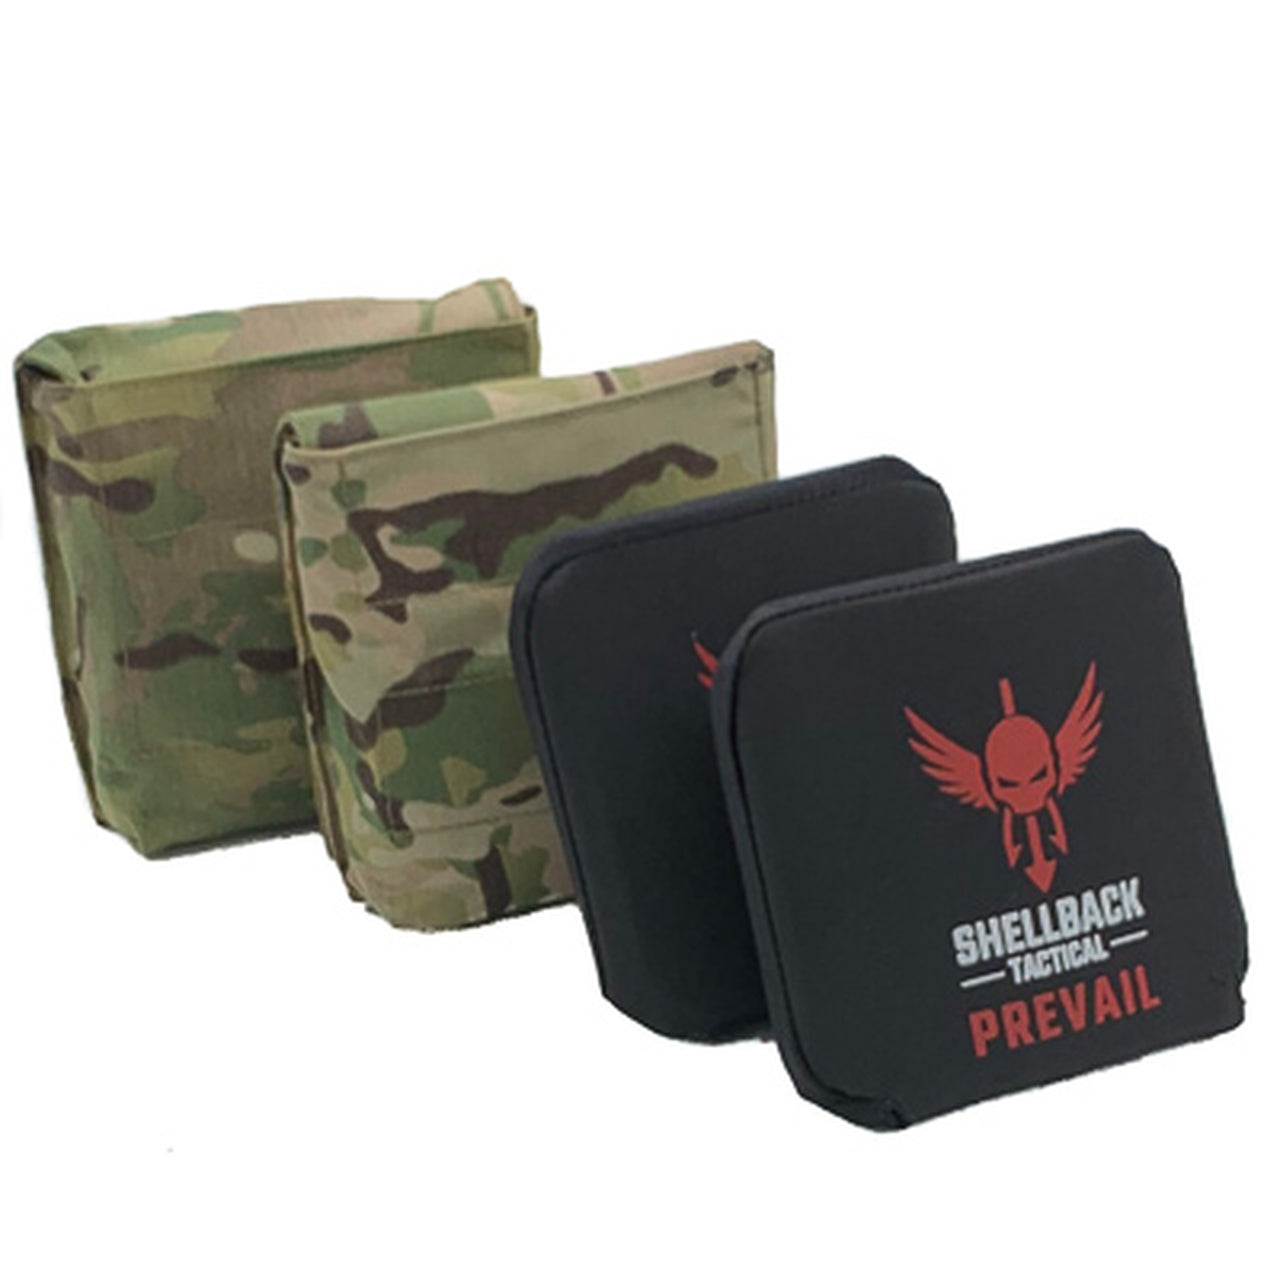 A pair of Shellback Tactical Side Armor Plate Kit with Level IV Model 4S17 Armor Plates pouches.